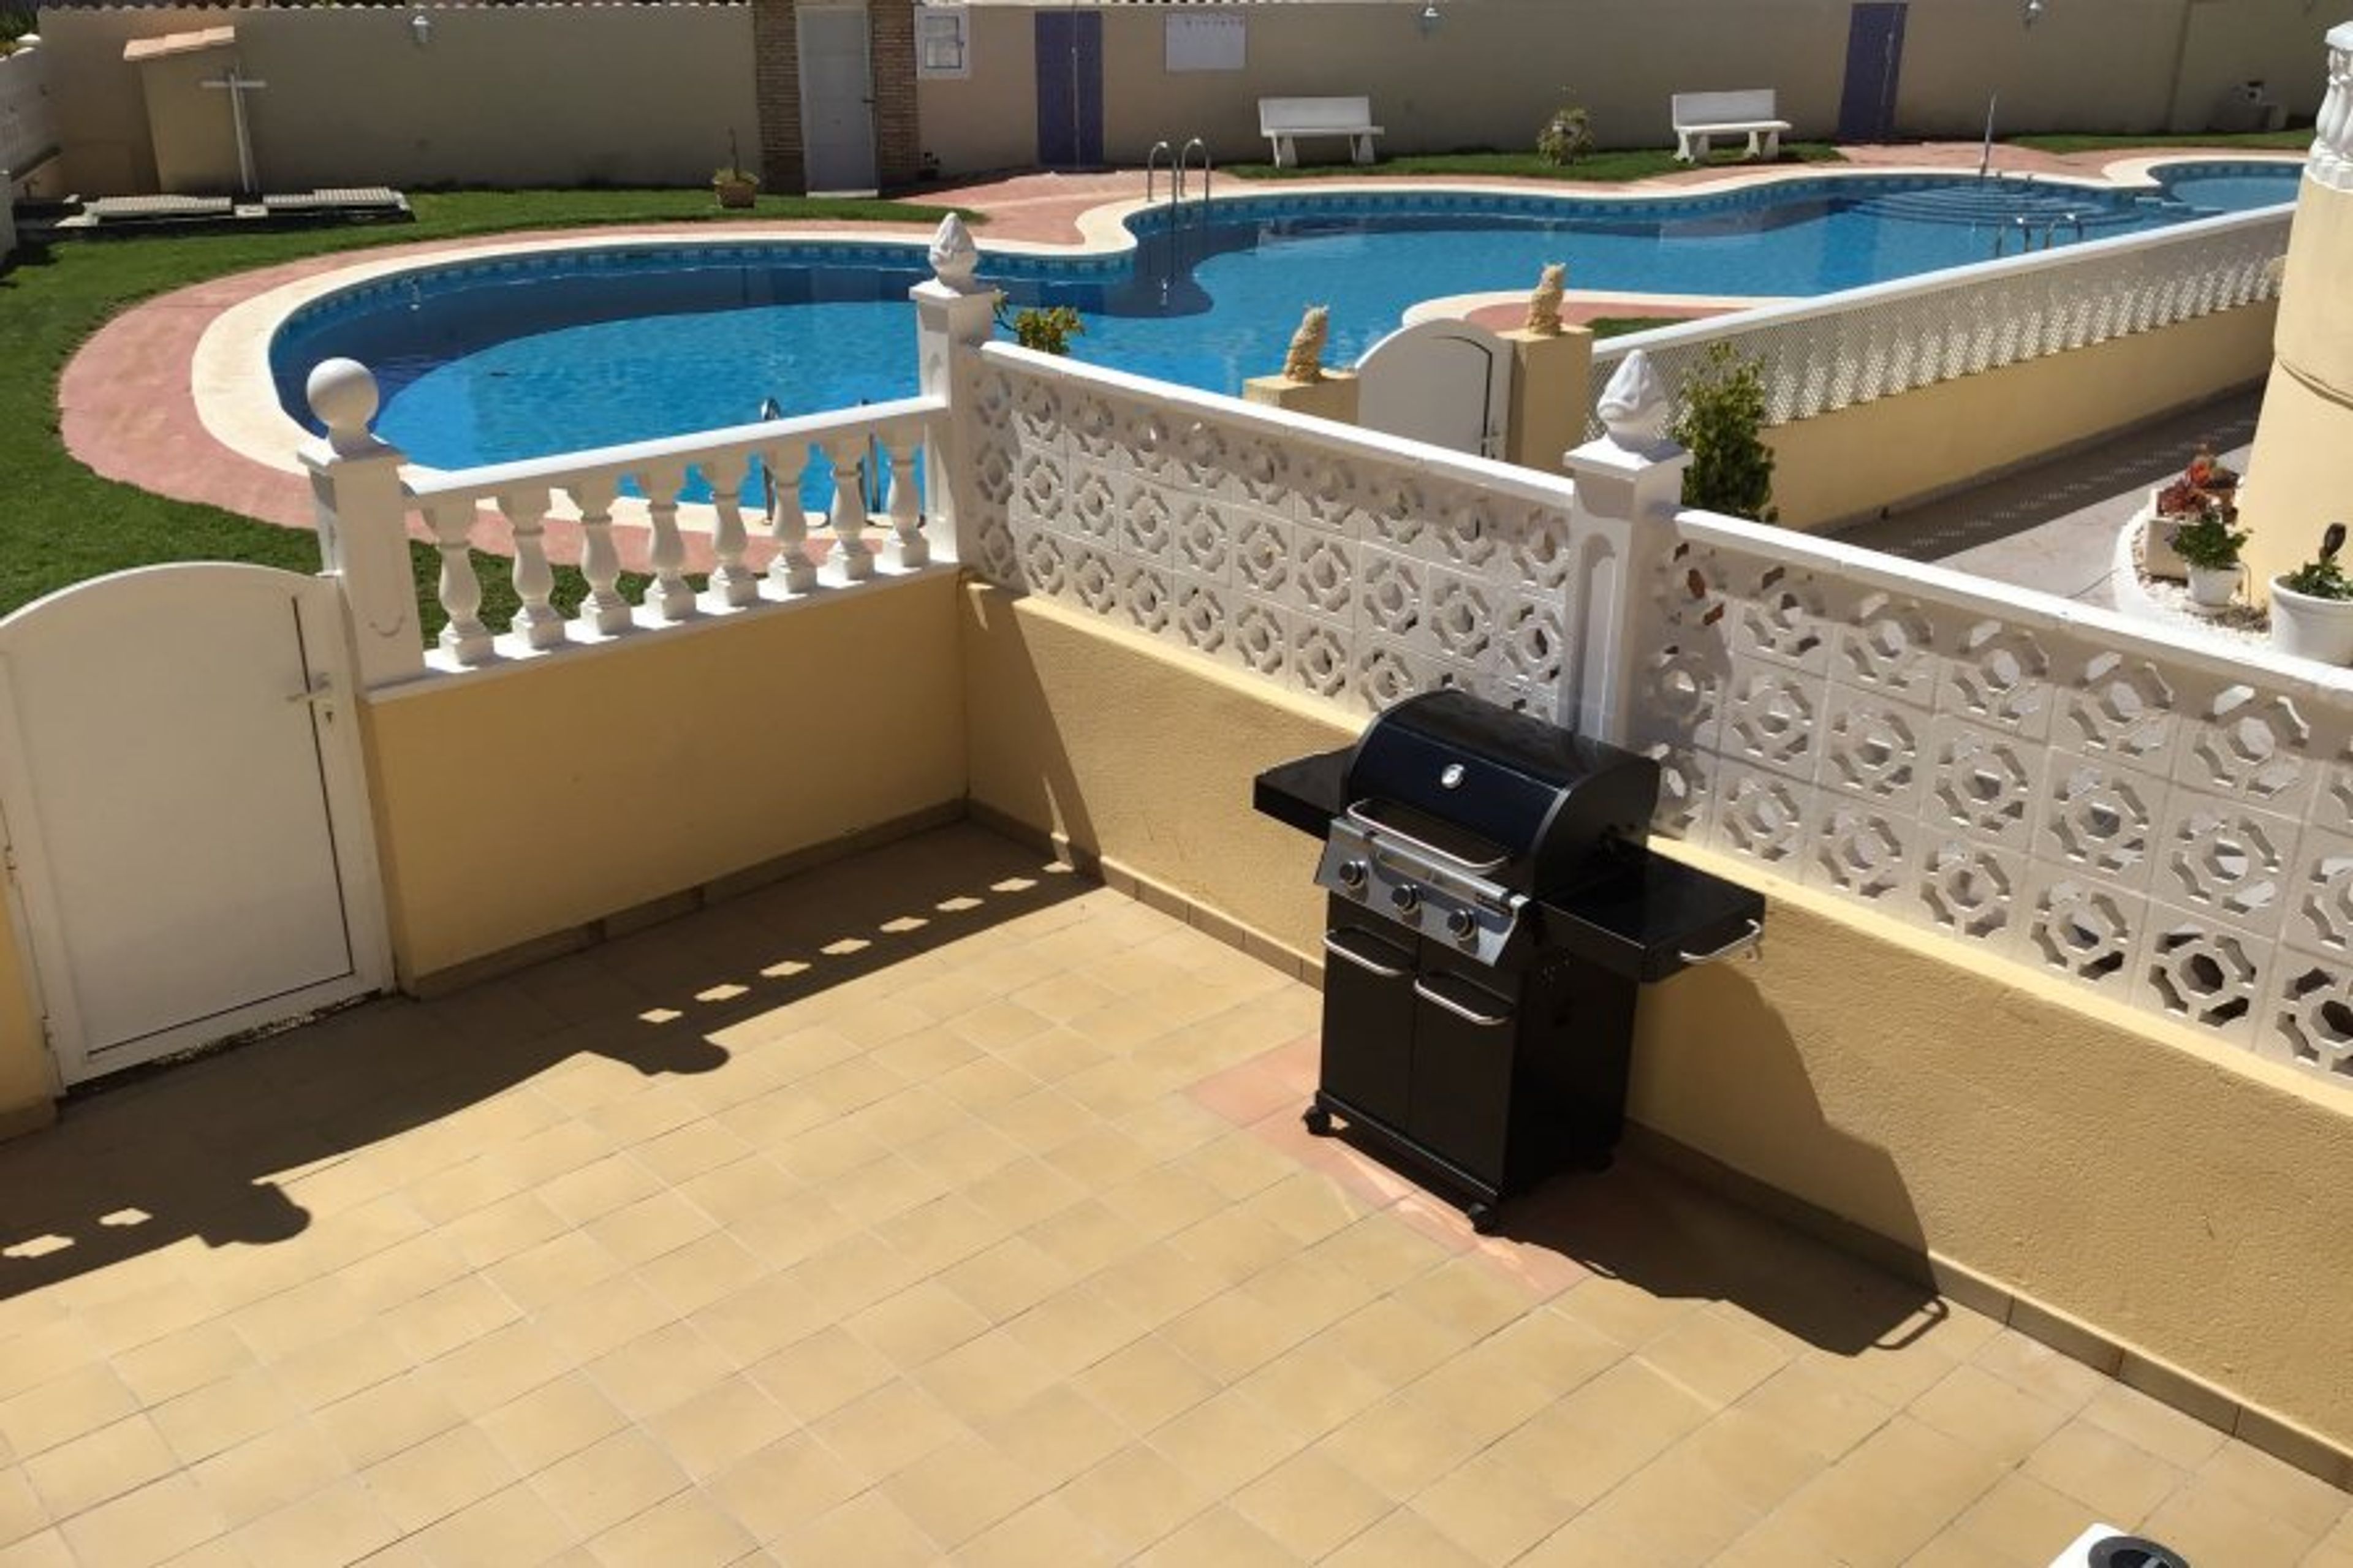 Lower terrace with gas BBQ, gate to pool.